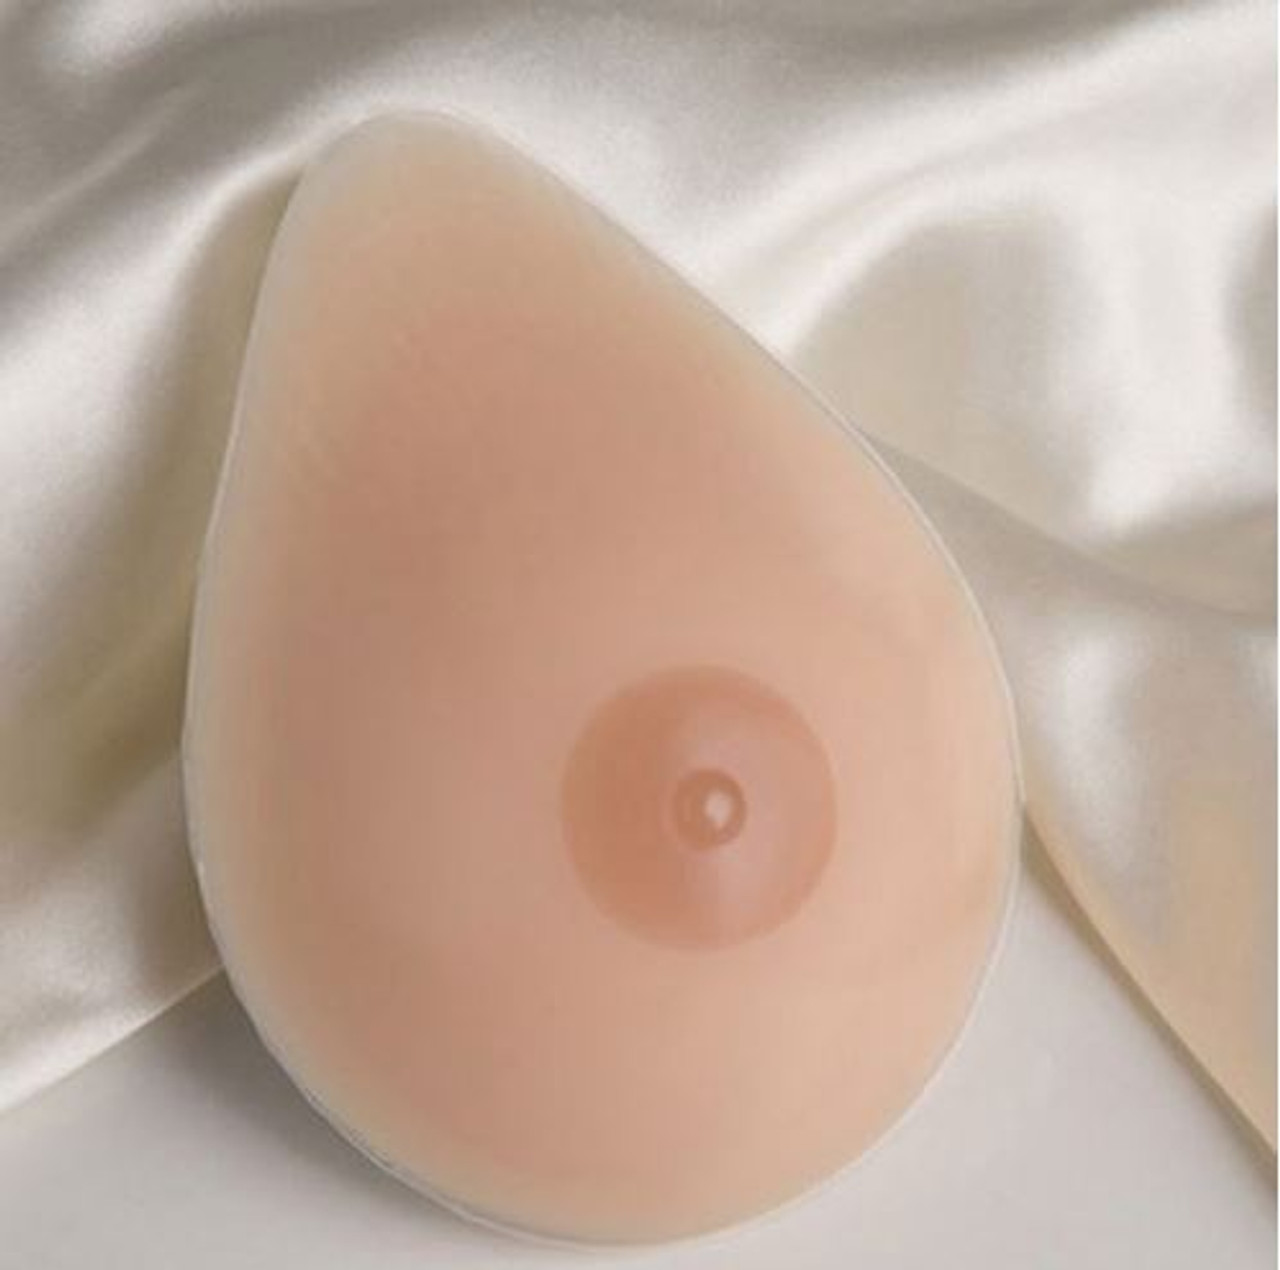 Triangle Shell Silicone Mastectomy Breast Form Prosthesis 251